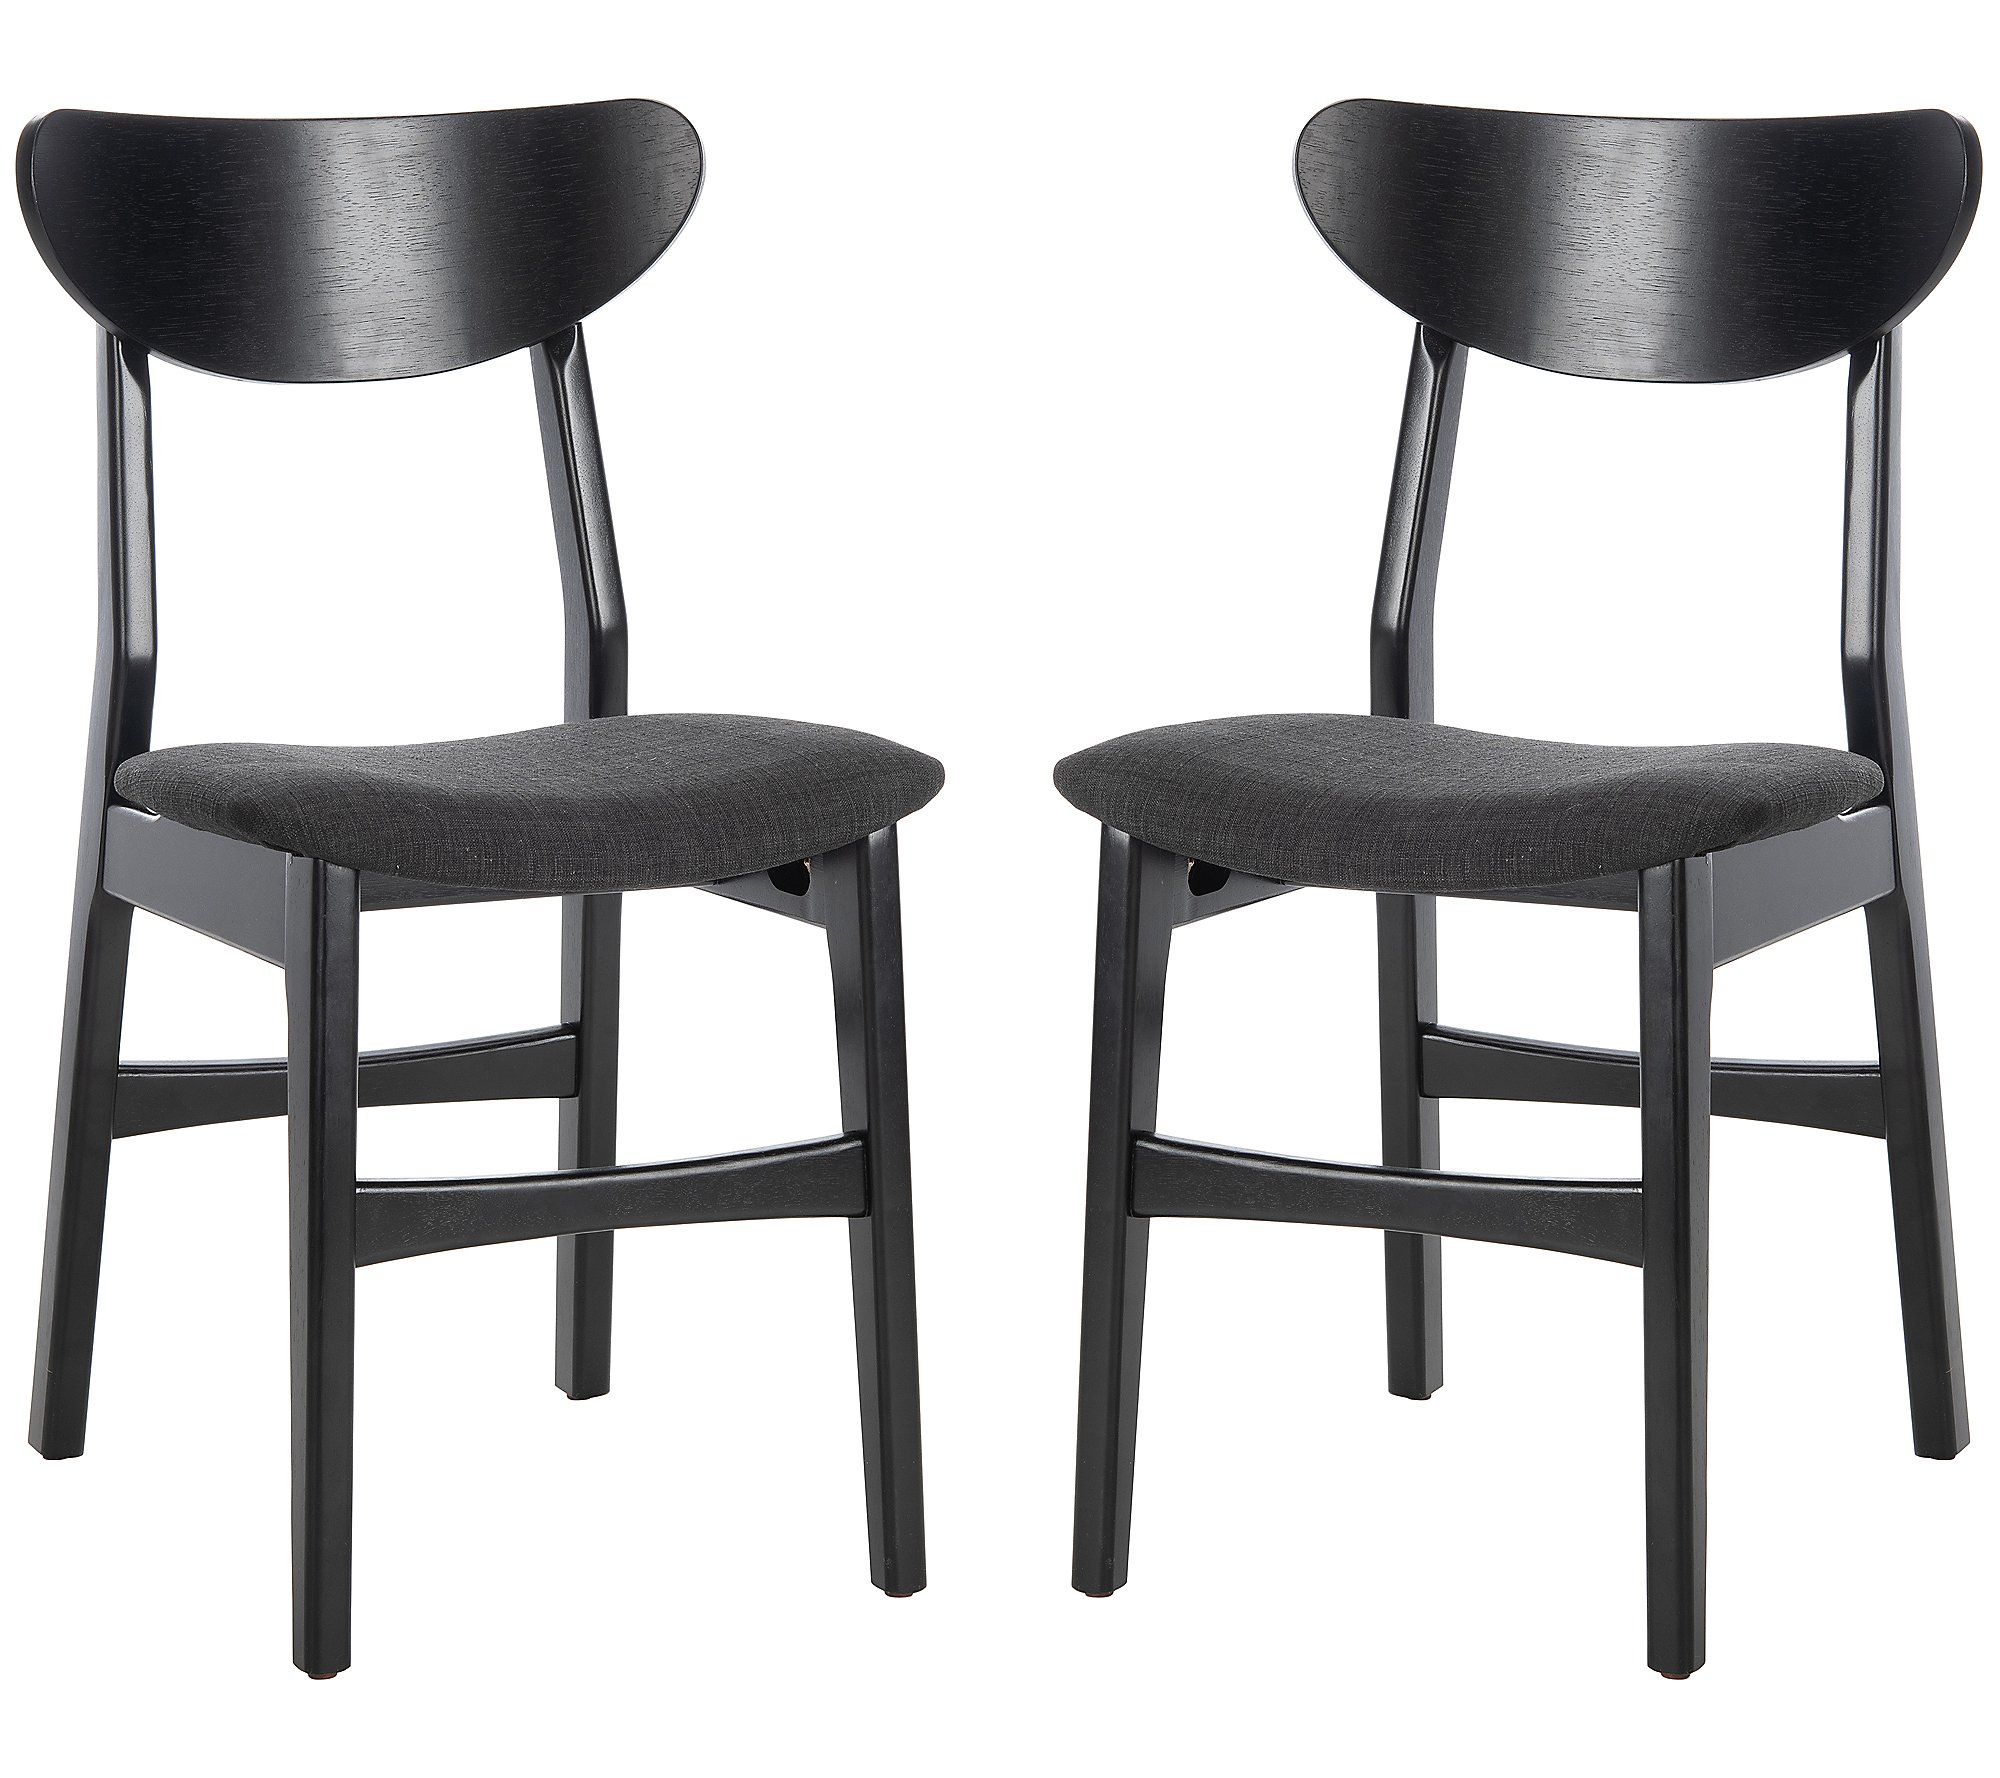 Safavieh Lucca Retro Dining Chair w/ Cushion (S et of 2)